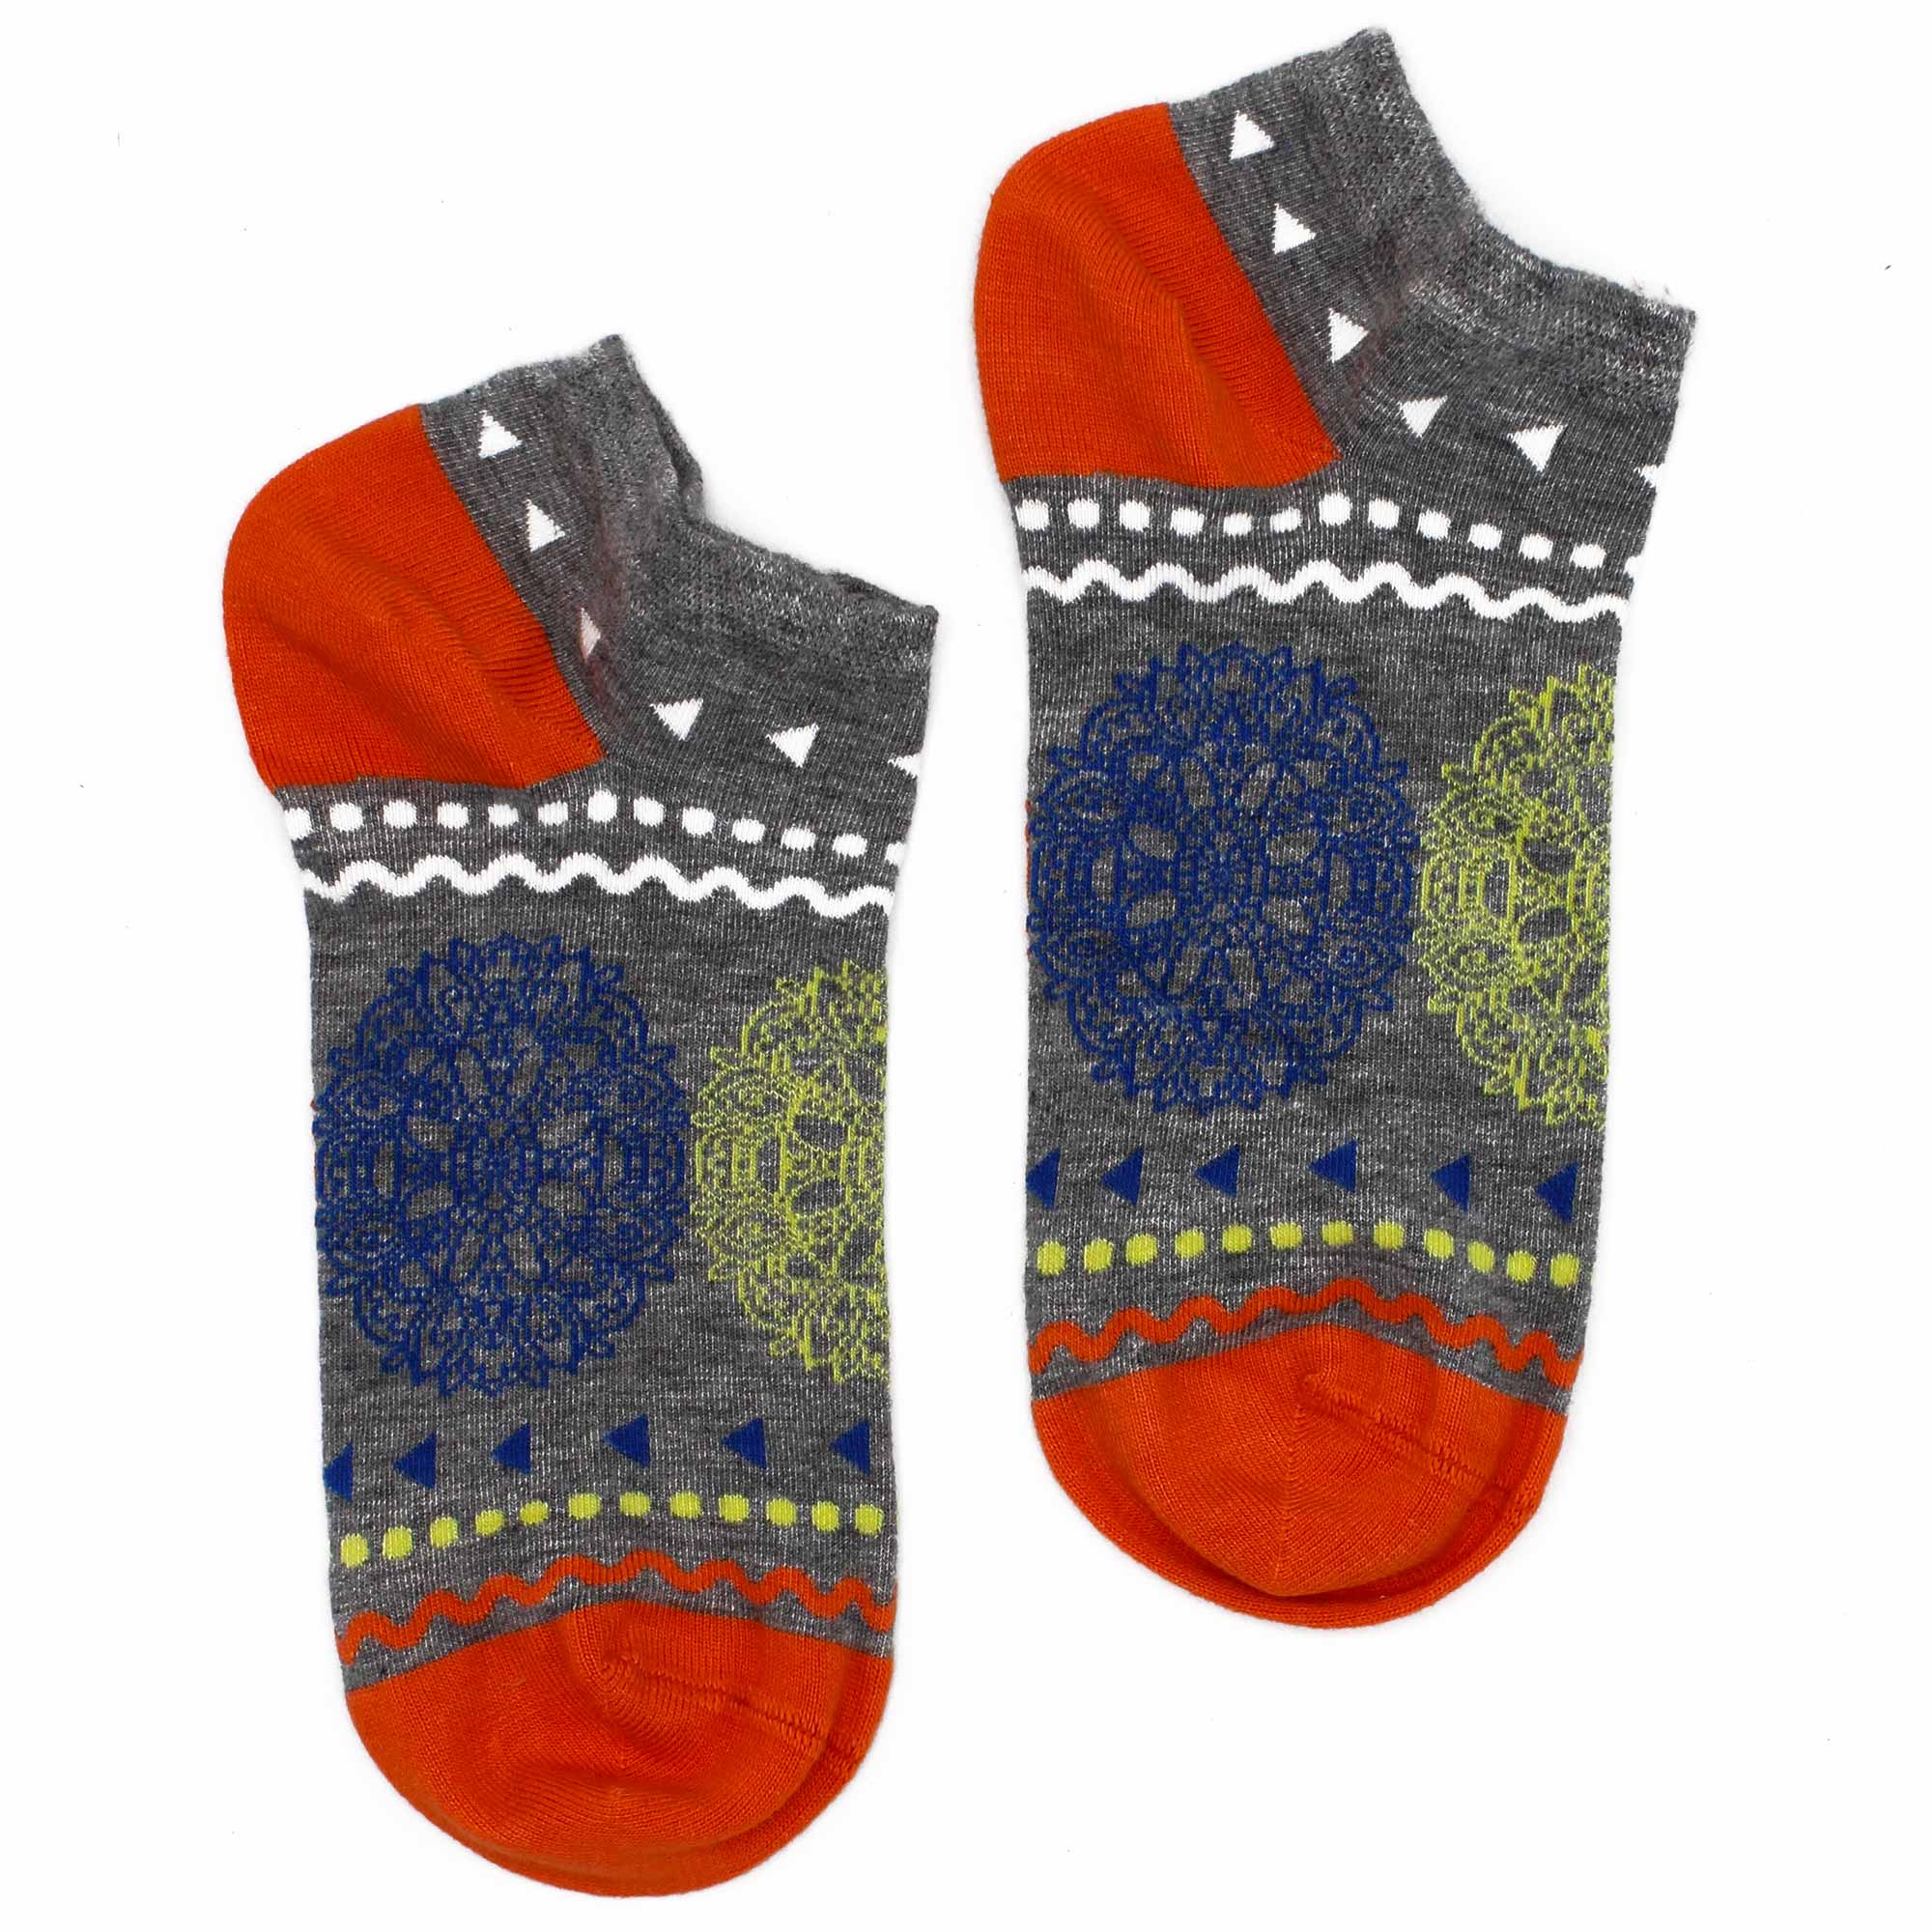 M/L Hop Hare Bamboo Socks Low (7.5-11.5) - Flowers of Life